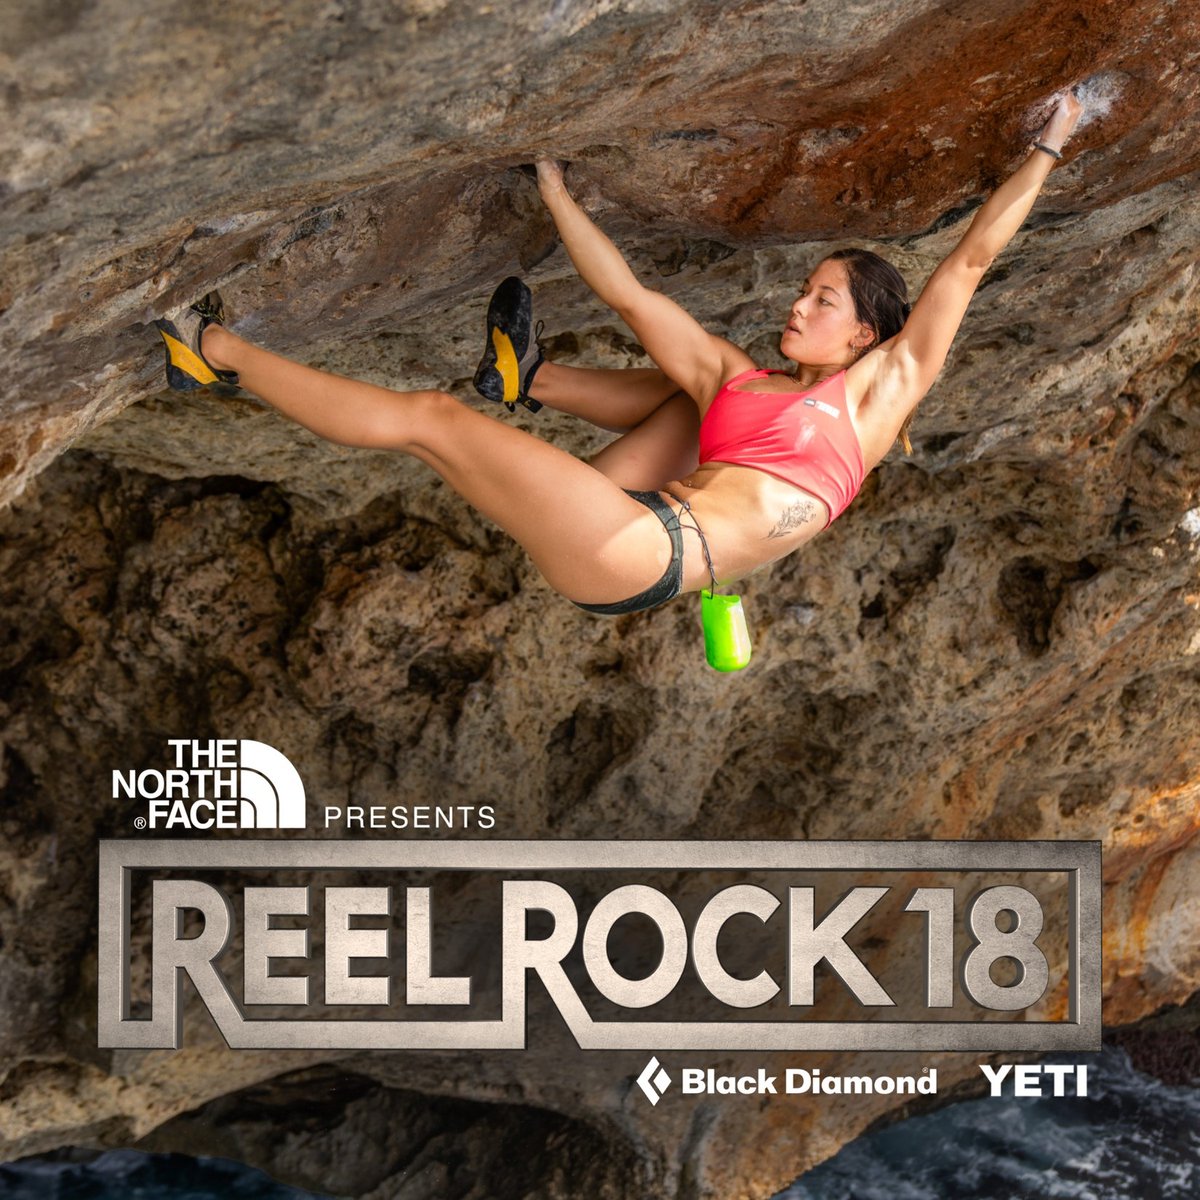 🧗🏻 𝗥𝗘𝗘𝗟 𝗥𝗢𝗖𝗞 𝟭𝟴 | 𝘚𝘤𝘳𝘦𝘦𝘯𝘪𝘯𝘨 𝘵𝘩𝘪𝘴 𝘔𝘰𝘯𝘥𝘢𝘺 𝘢𝘵 𝘛𝘩𝘦 𝘞𝘢𝘭𝘬𝘦𝘳 𝘛𝘩𝘦𝘢𝘵𝘳𝘦 Immerse yourself in four new adventure-filled climbing films from across the globe! 🏔️ 🗓️ 8 Apr| Tickets: orlo.uk/0HjIW